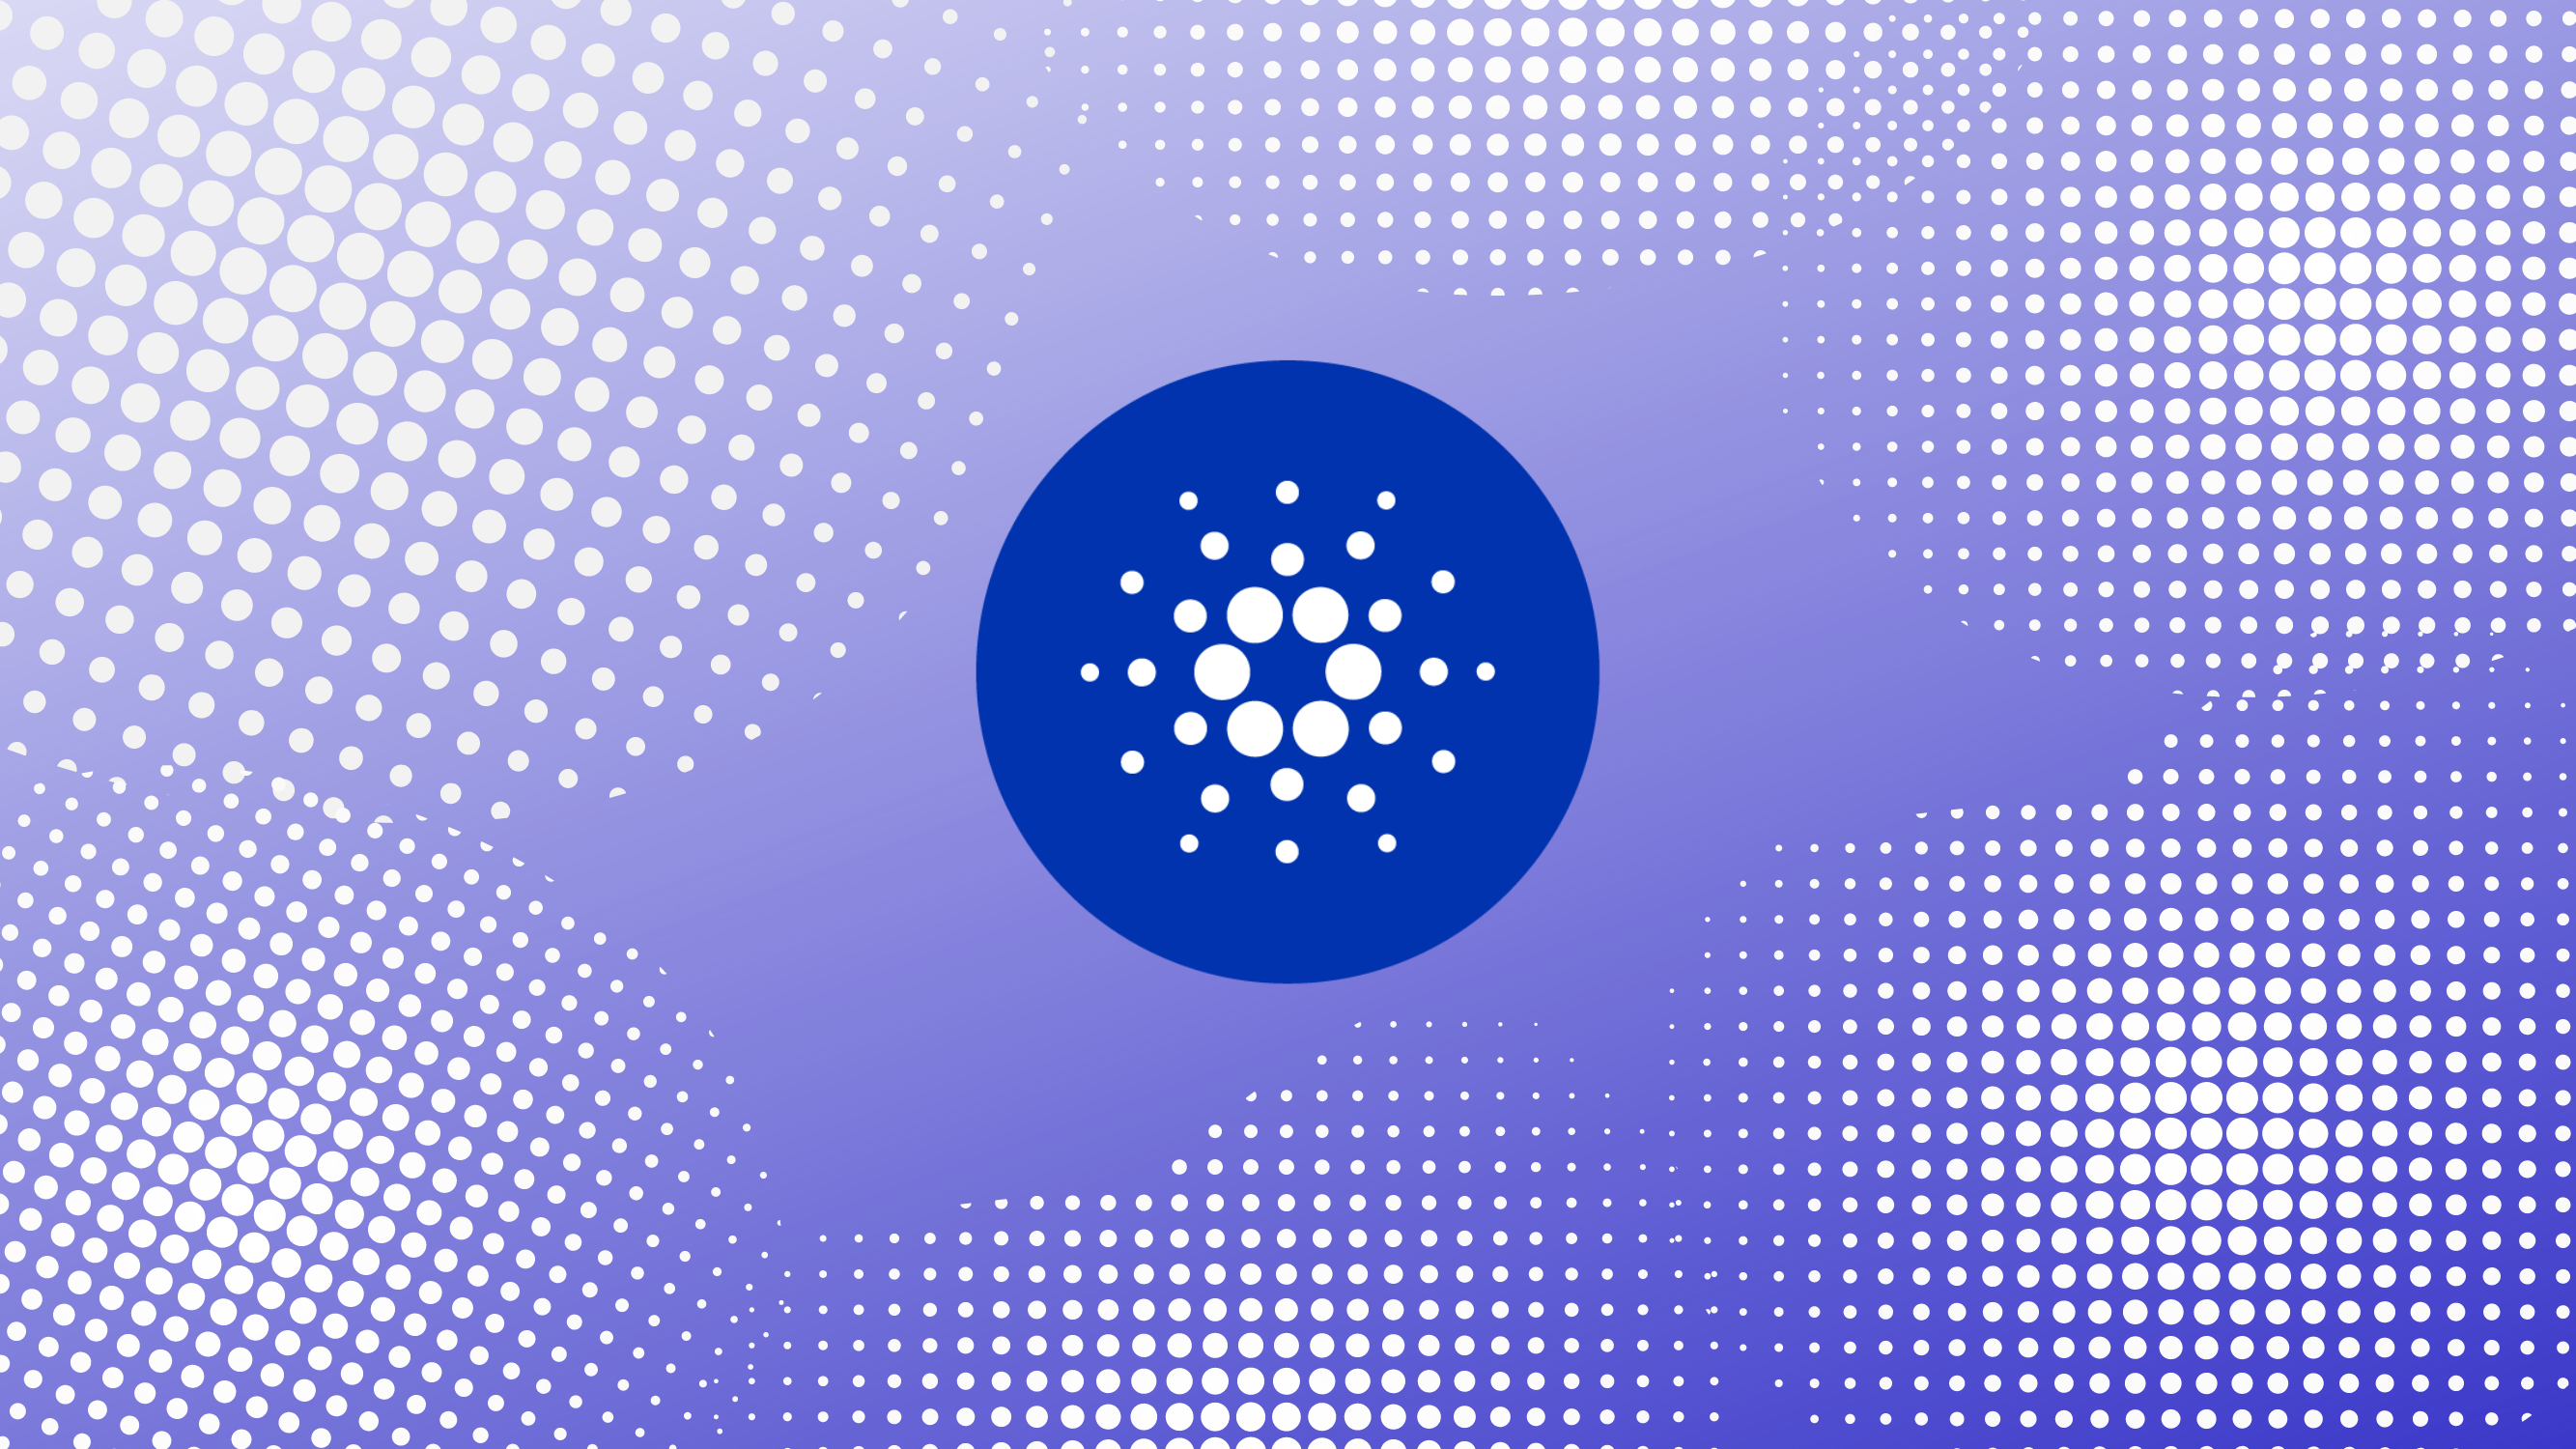 Cover Image for Cryptocurrency Explained: What Is Cardano? 